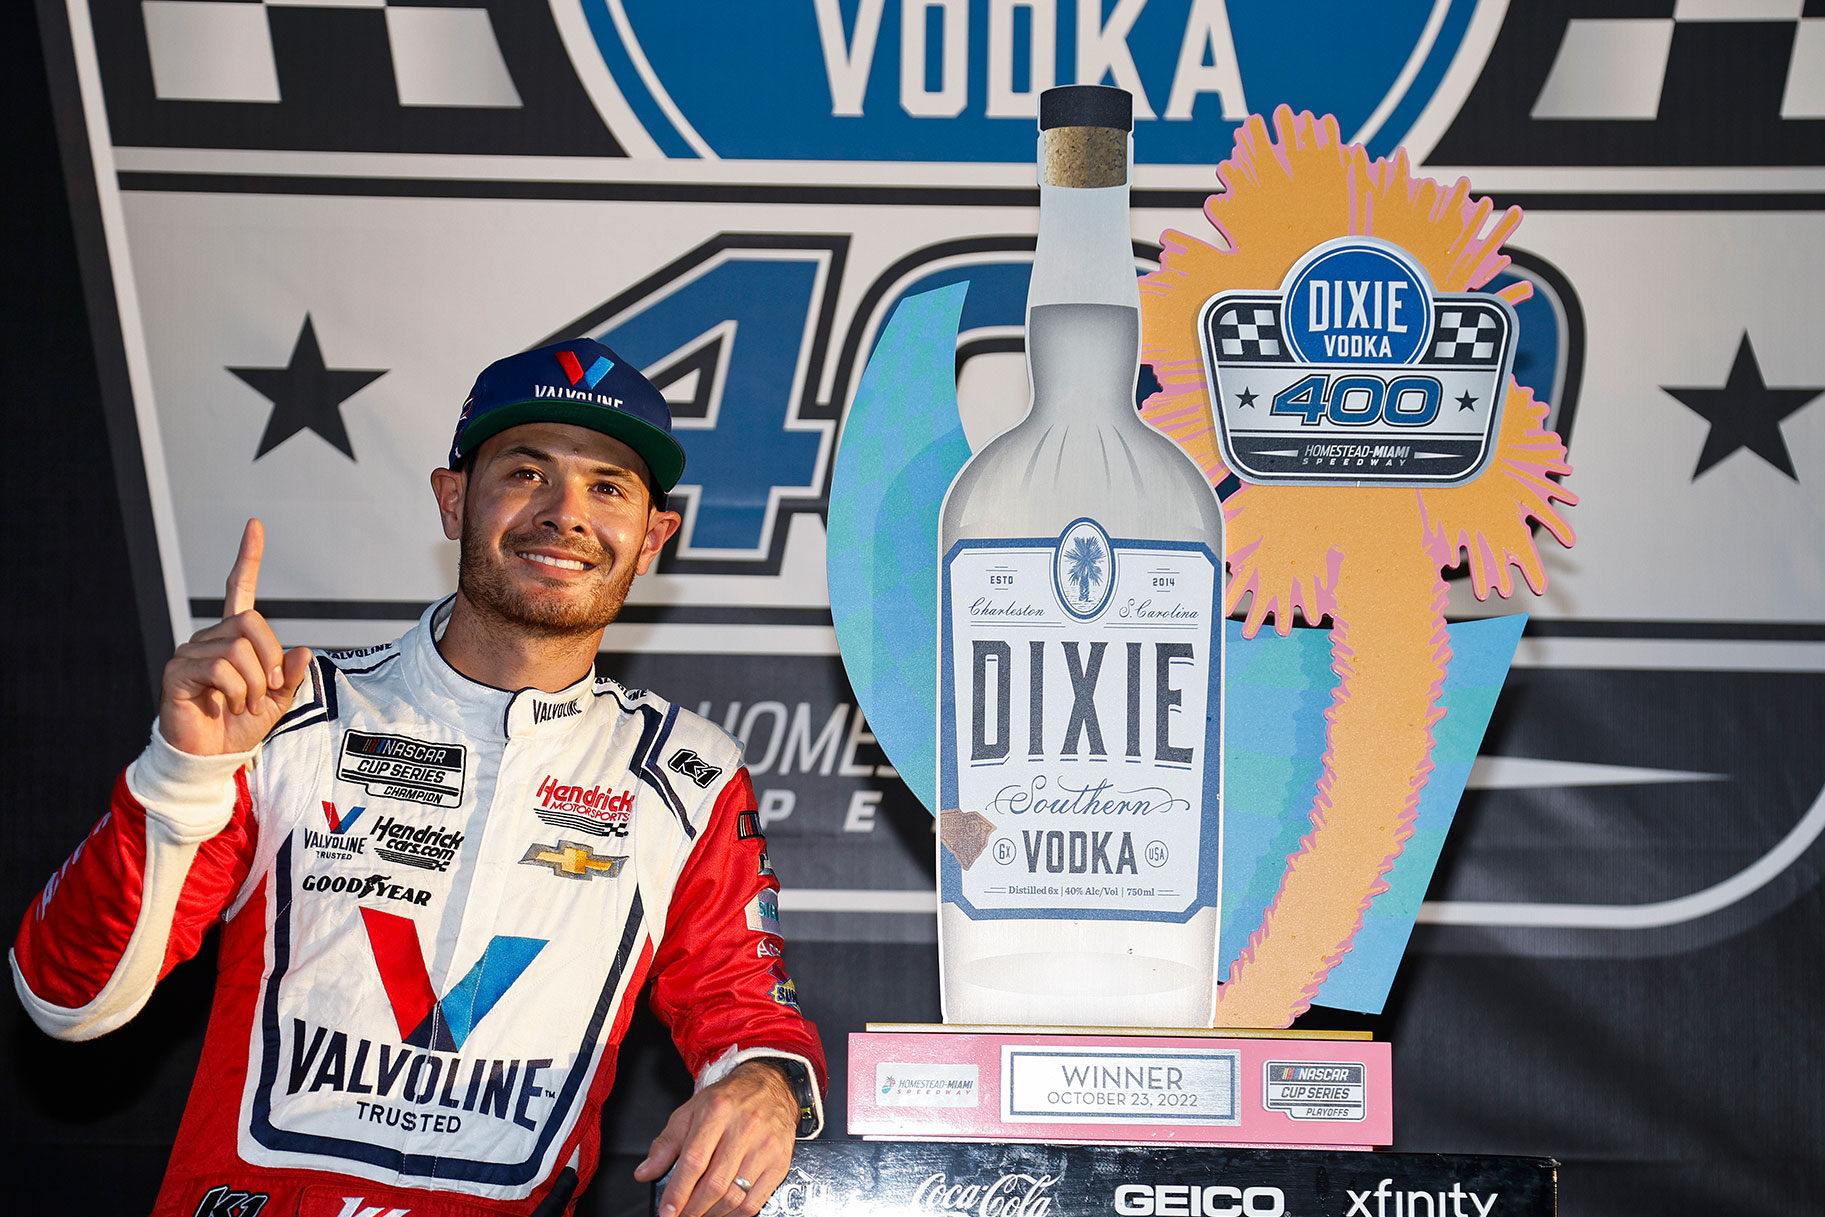 Kyle Larson, driver of the #5 Valvoline Chevrolet, celebrates in victory lane after winning the NASCAR Cup Series Dixie Vodka 400